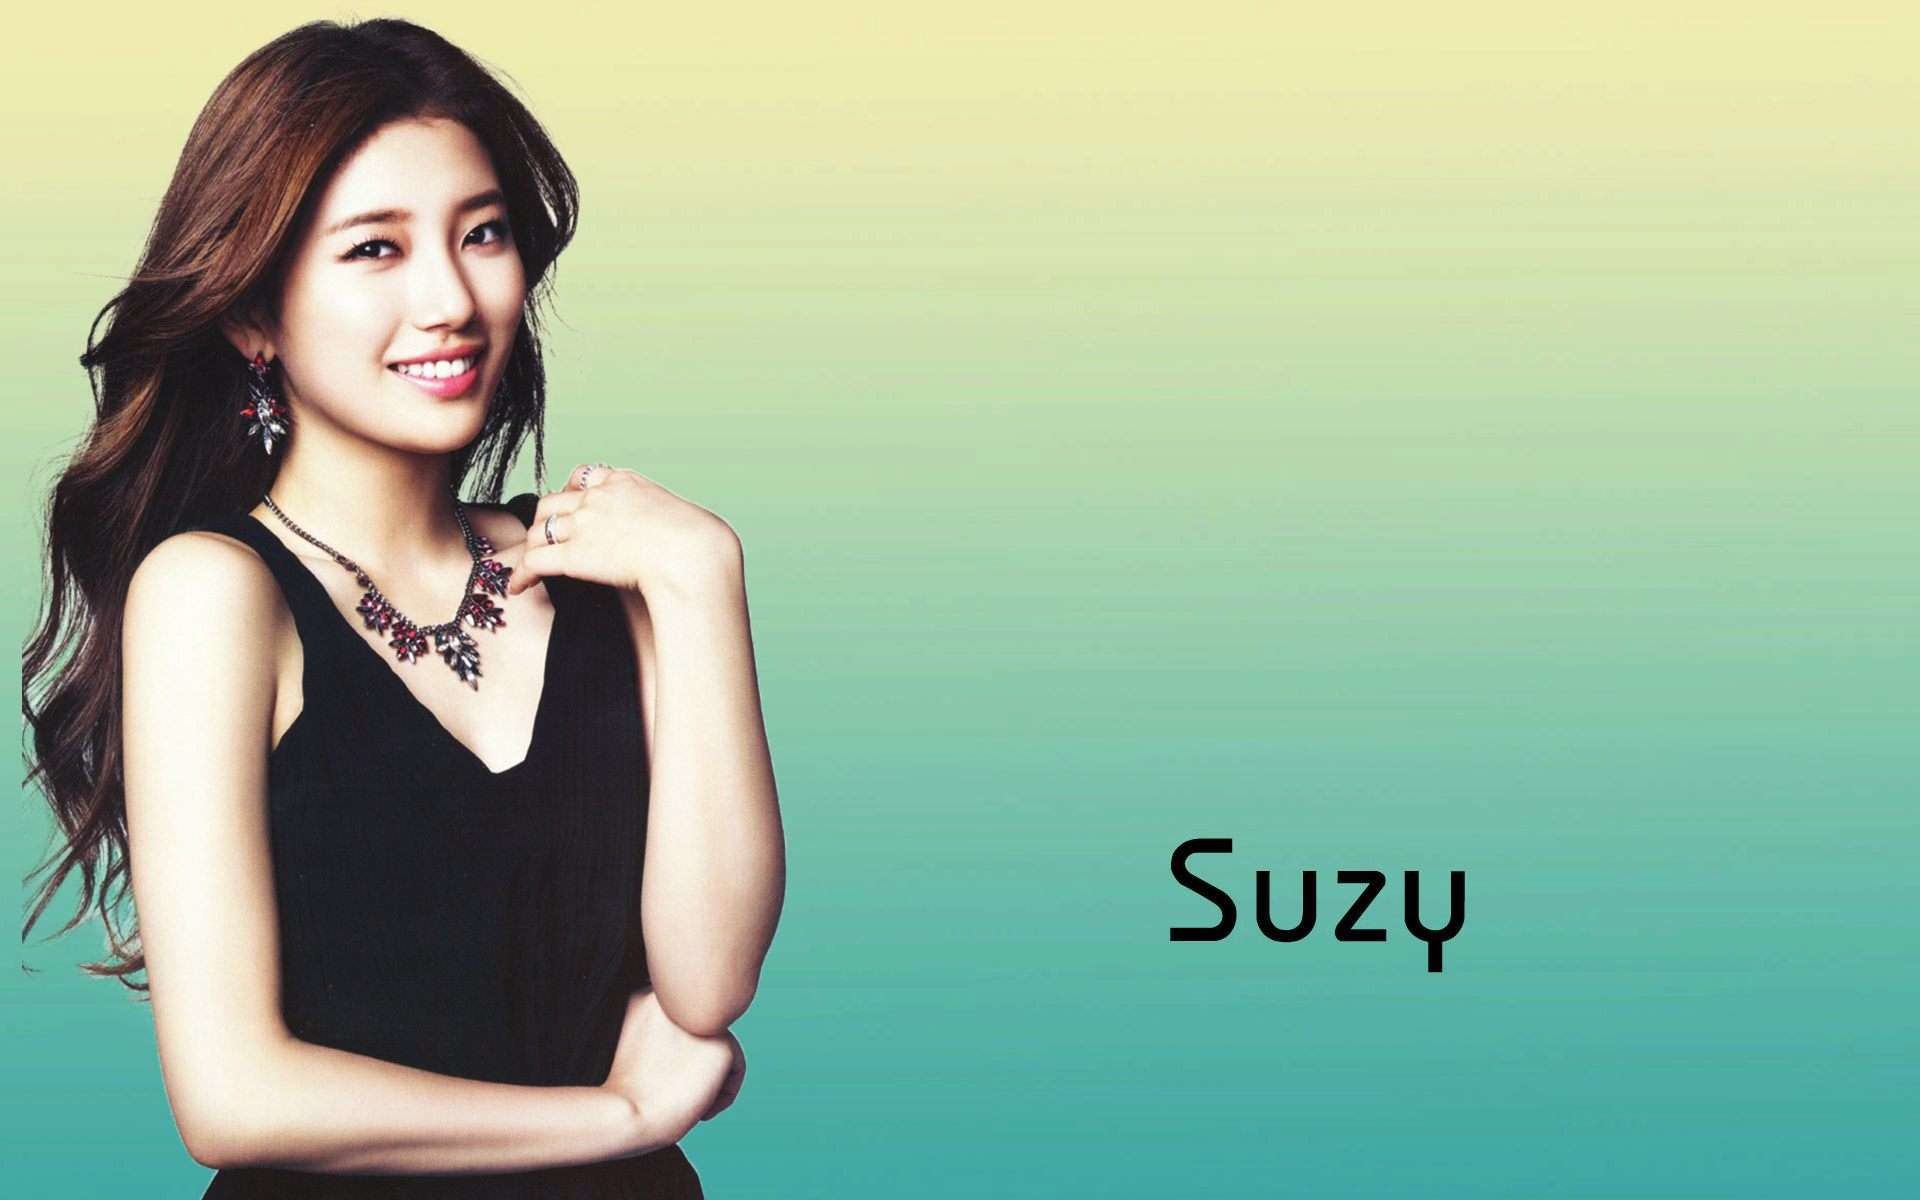 1920x1200 Bae Suzy Wallpapers Pack 628: Bae Suzy Wallpapers, 40 Bae Suzy .